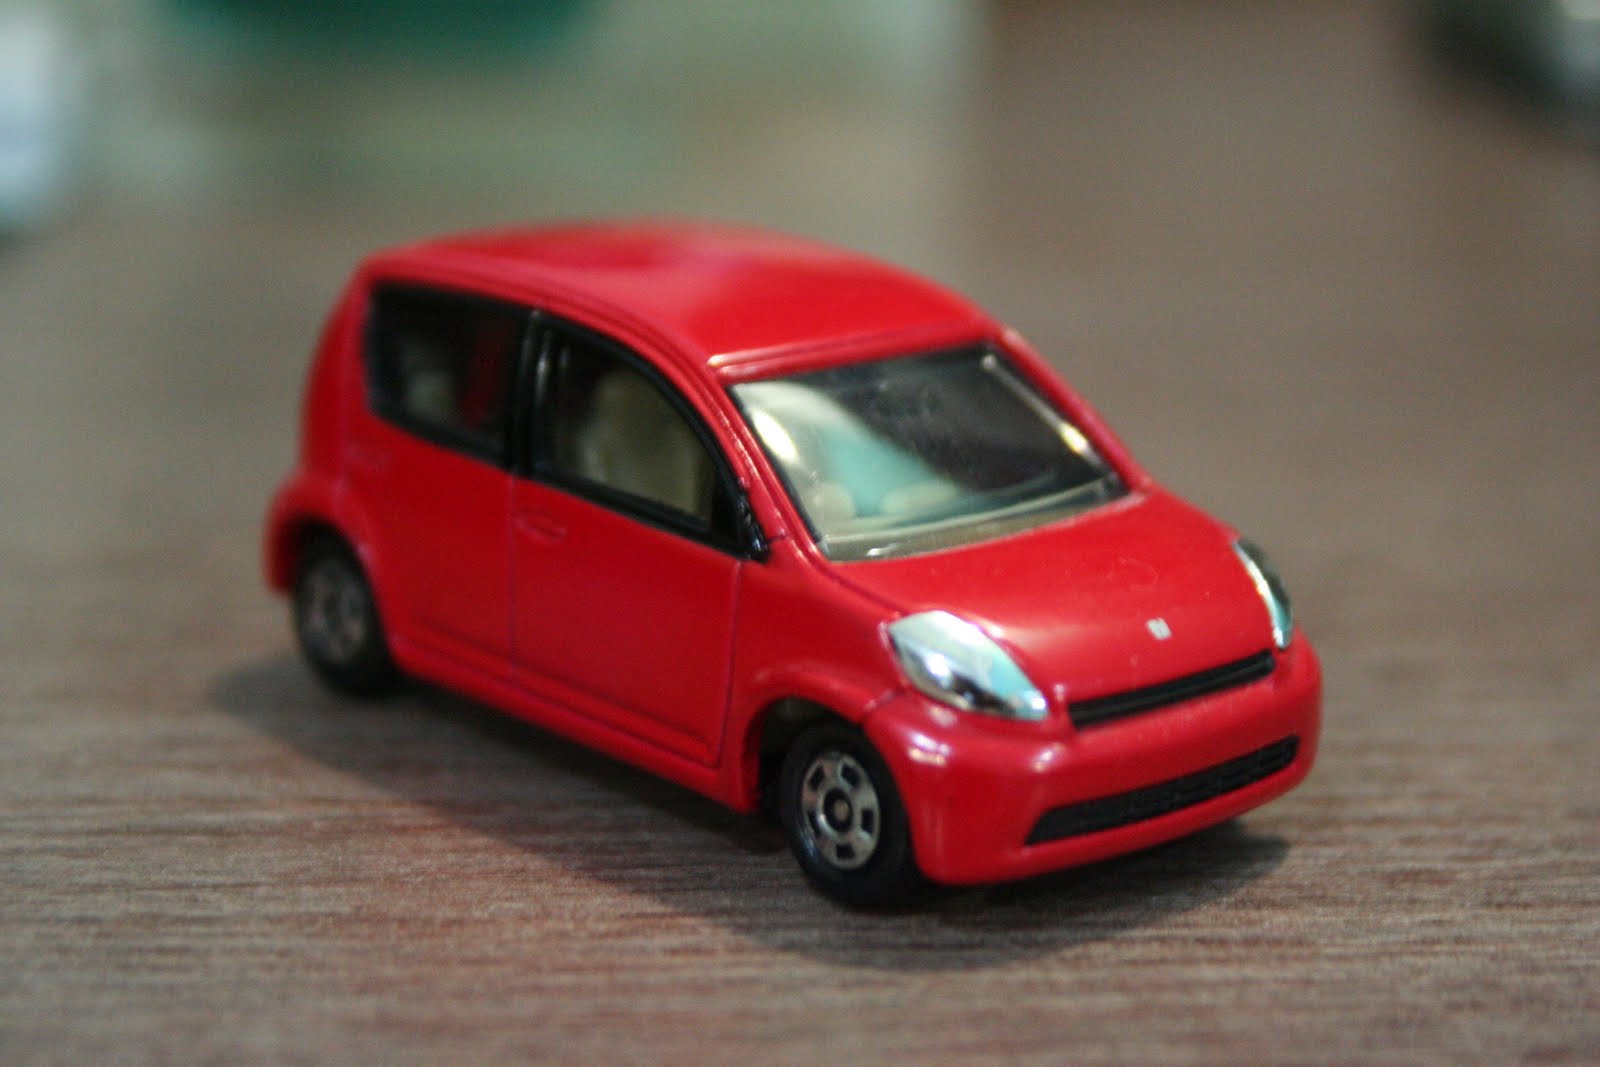 1/64 Die-cast Toy Cars.: Tomica - Toyota Passo